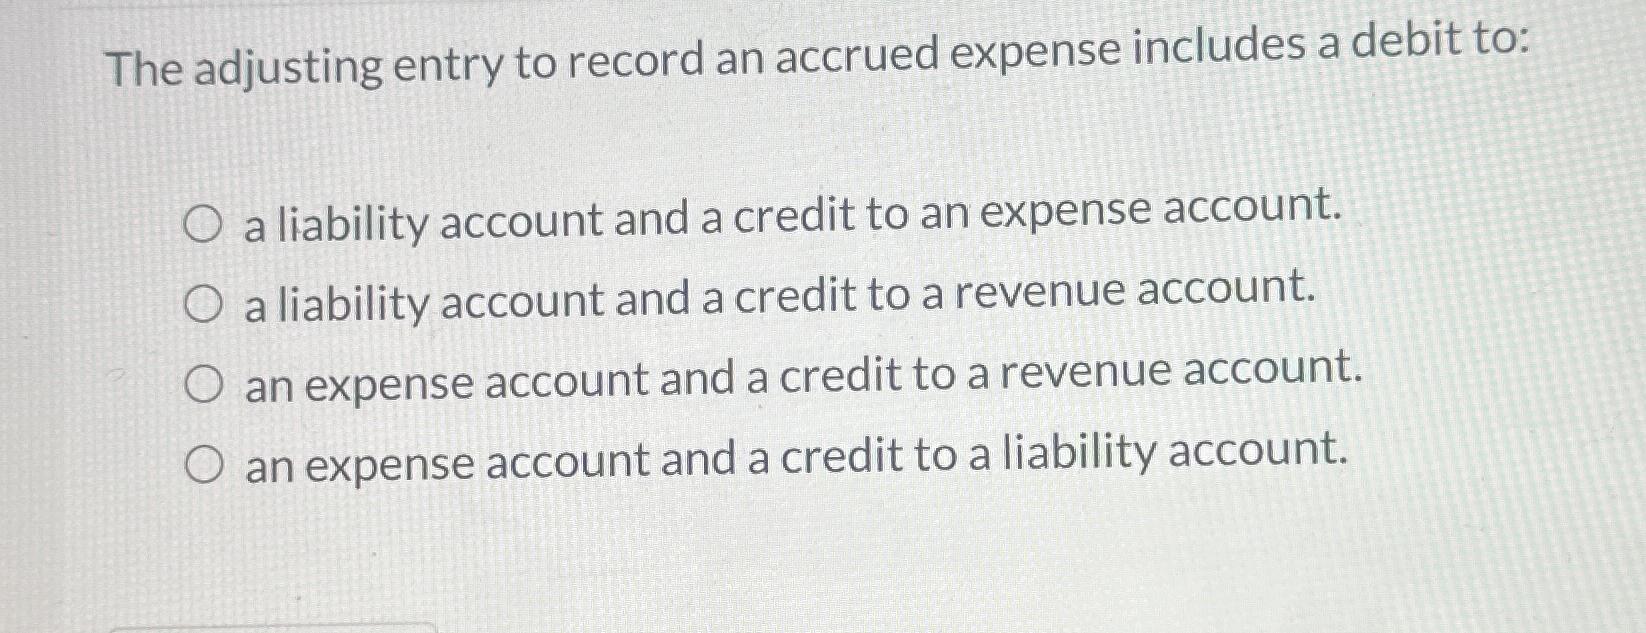 The adjusting entry to record an accrued expense includes a debit to: O a liability account and a credit to